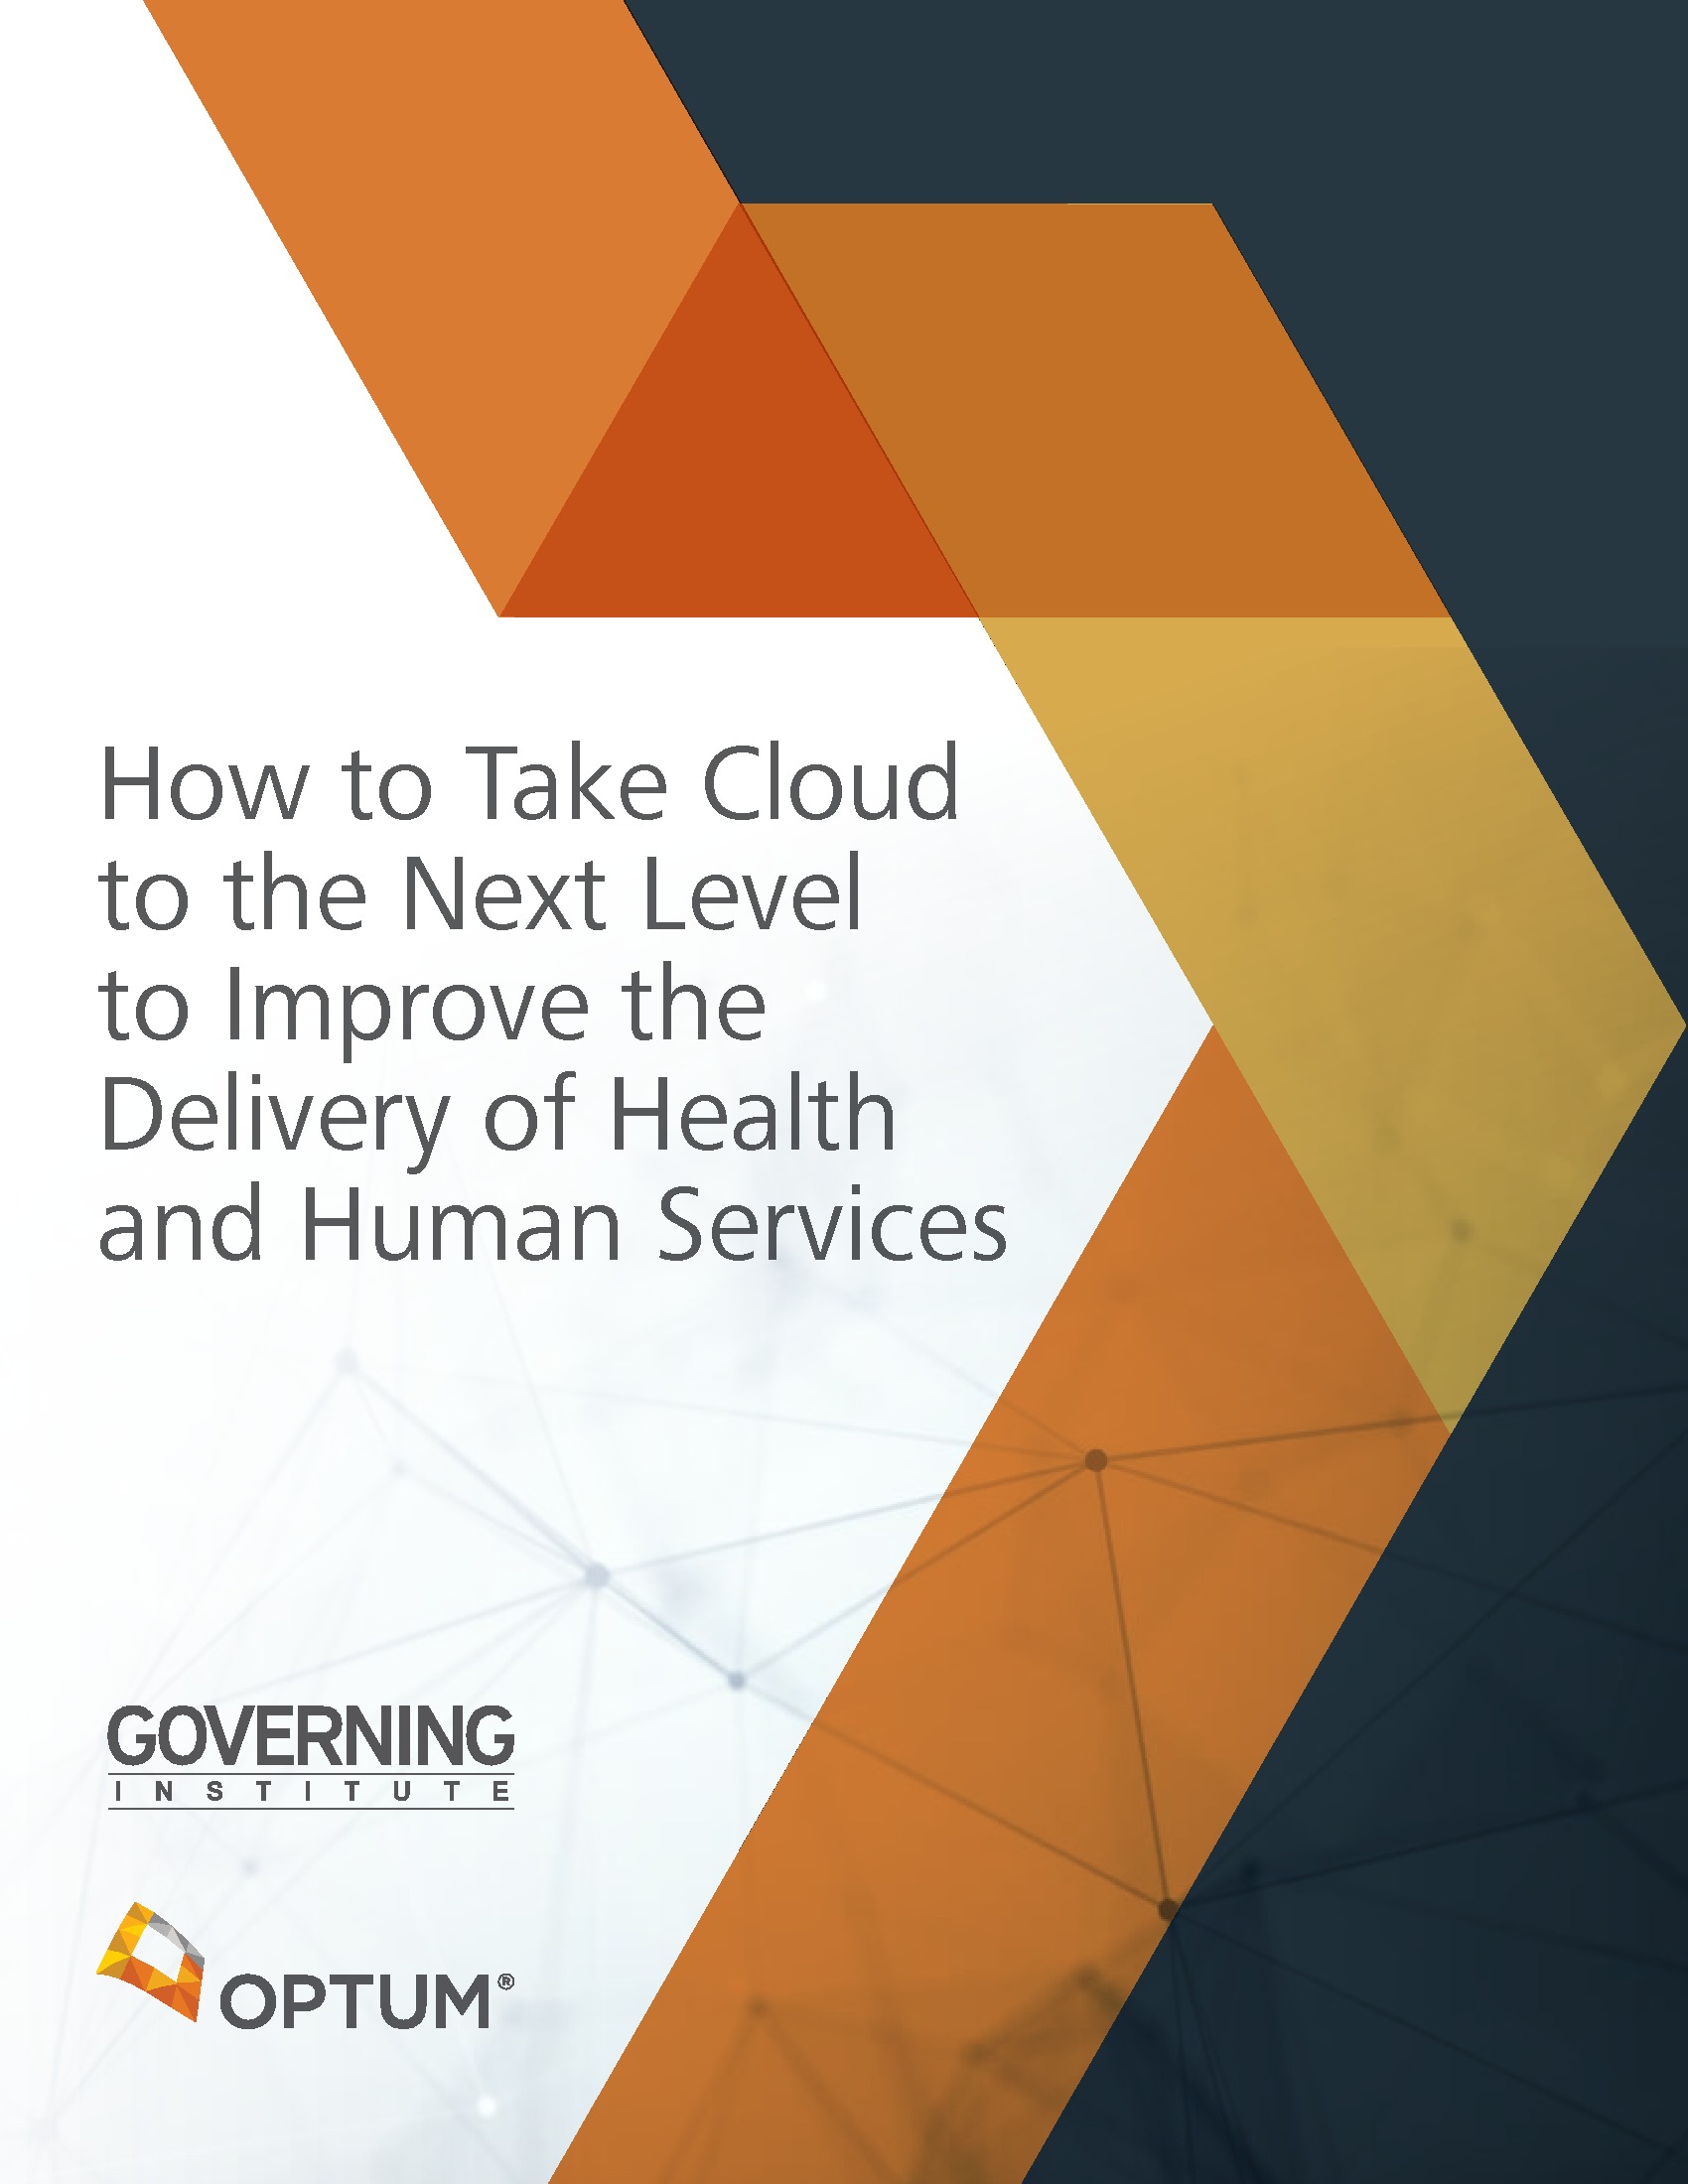 How to Take Cloud to the Next Level to Improve the Delivery of Health and Human Services